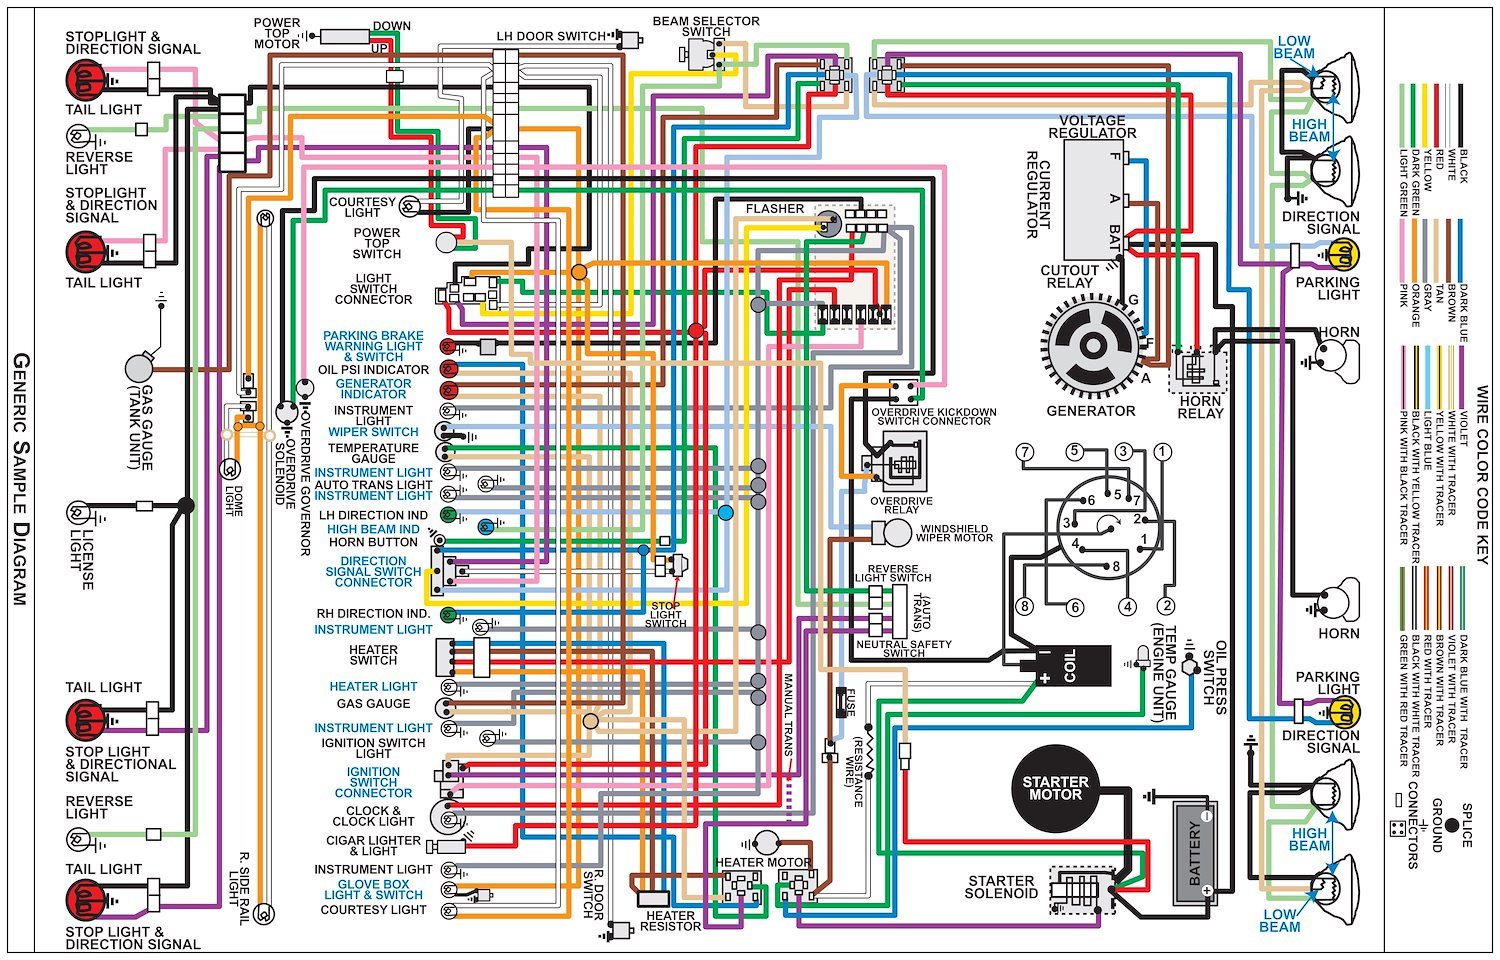 Wiring Diagram for 1965 Chevy Belair, Biscayne, Impala,